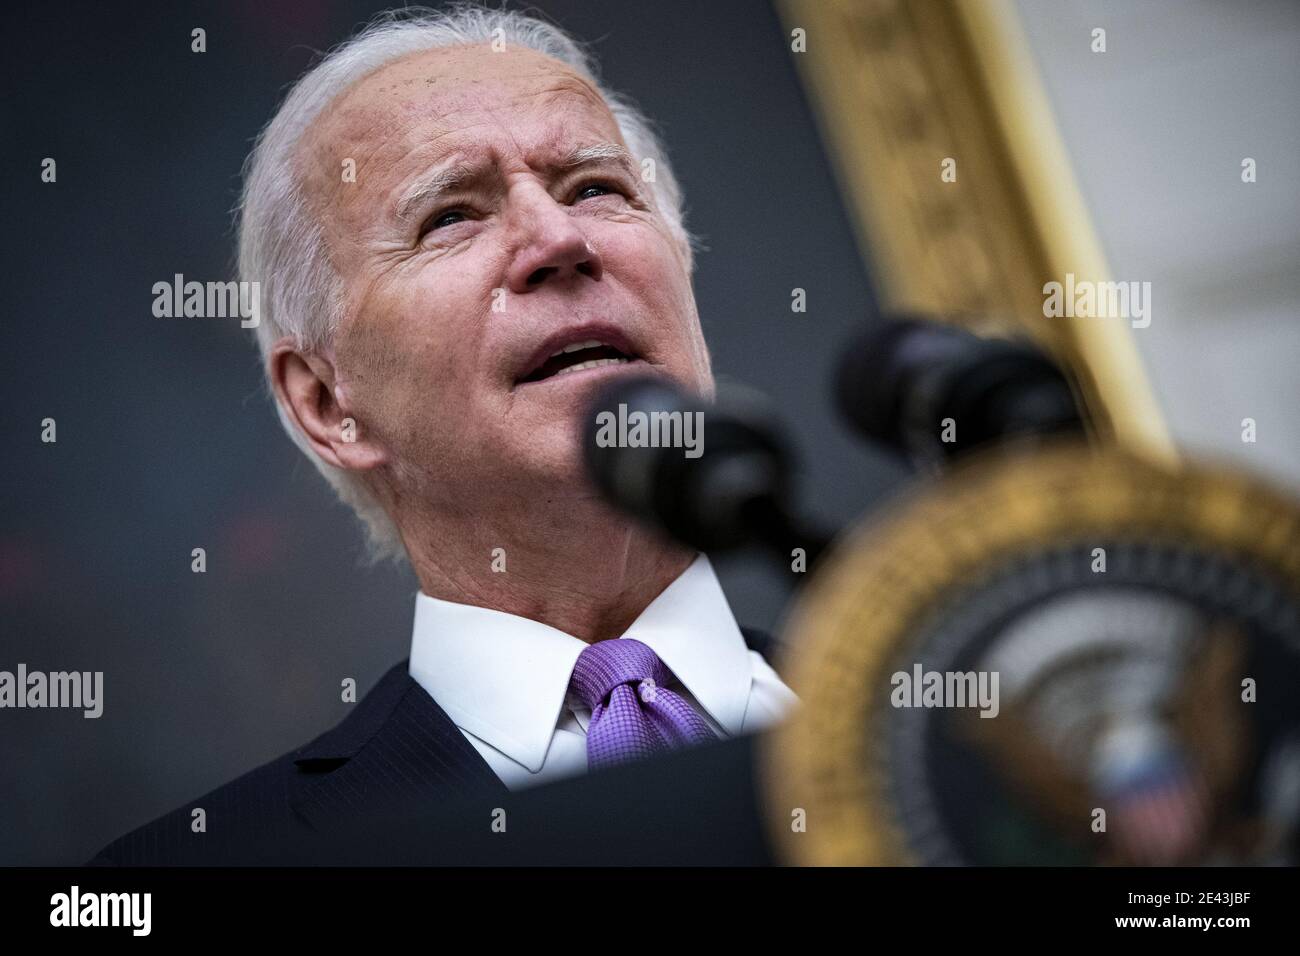 Washington, United States. 21st Jan, 2021. U.S. President Joe Biden speaks on his administration's Covid-19 response in the State Dining Room of the White House in Washington, DC, U.S., on Thursday, Jan. 21, 2021. Biden in his first full day in office plans to issue a sweeping set of executive orders to tackle the raging Covid-19 pandemic that will rapidly reverse or refashion many of his predecessor's most heavily criticized policies. Photo by Al Drago/UPI Credit: UPI/Alamy Live News Stock Photo